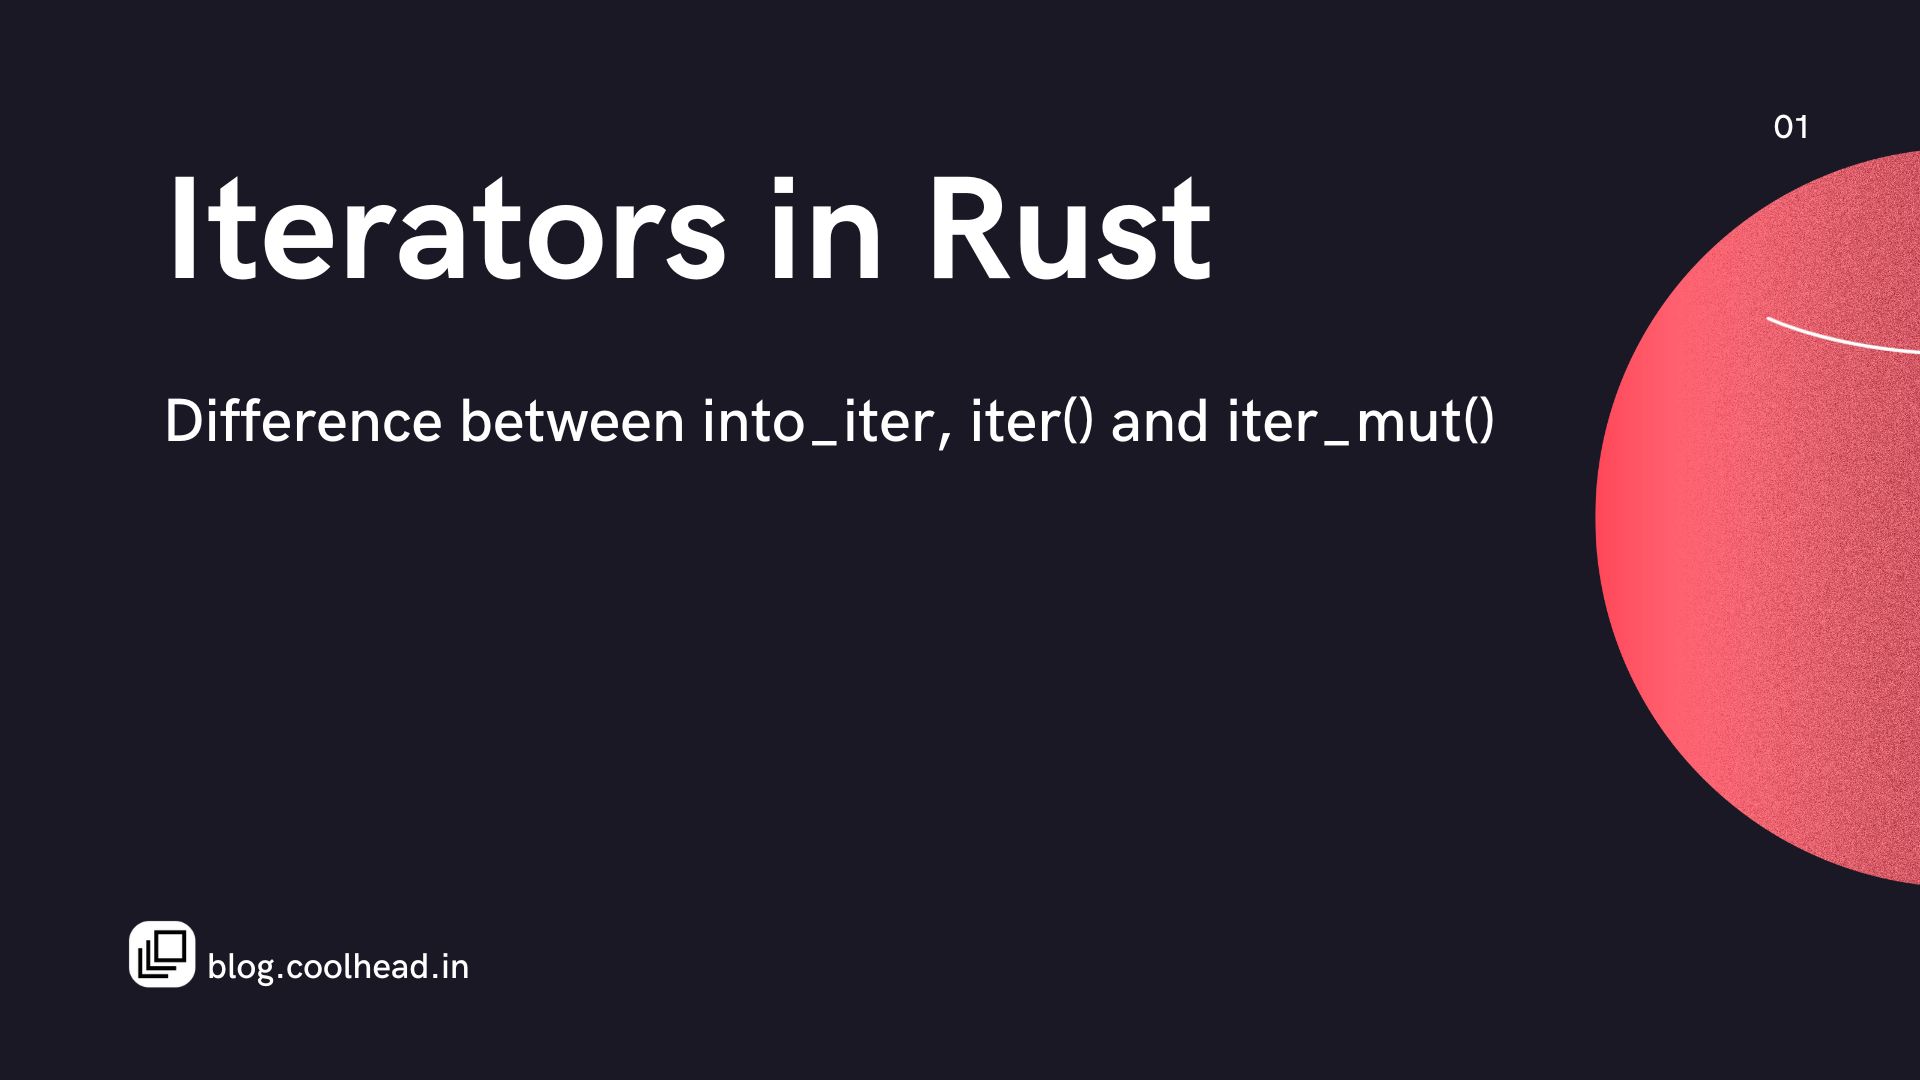 Difference Between into_iter, iter() and iter_mut() in rust